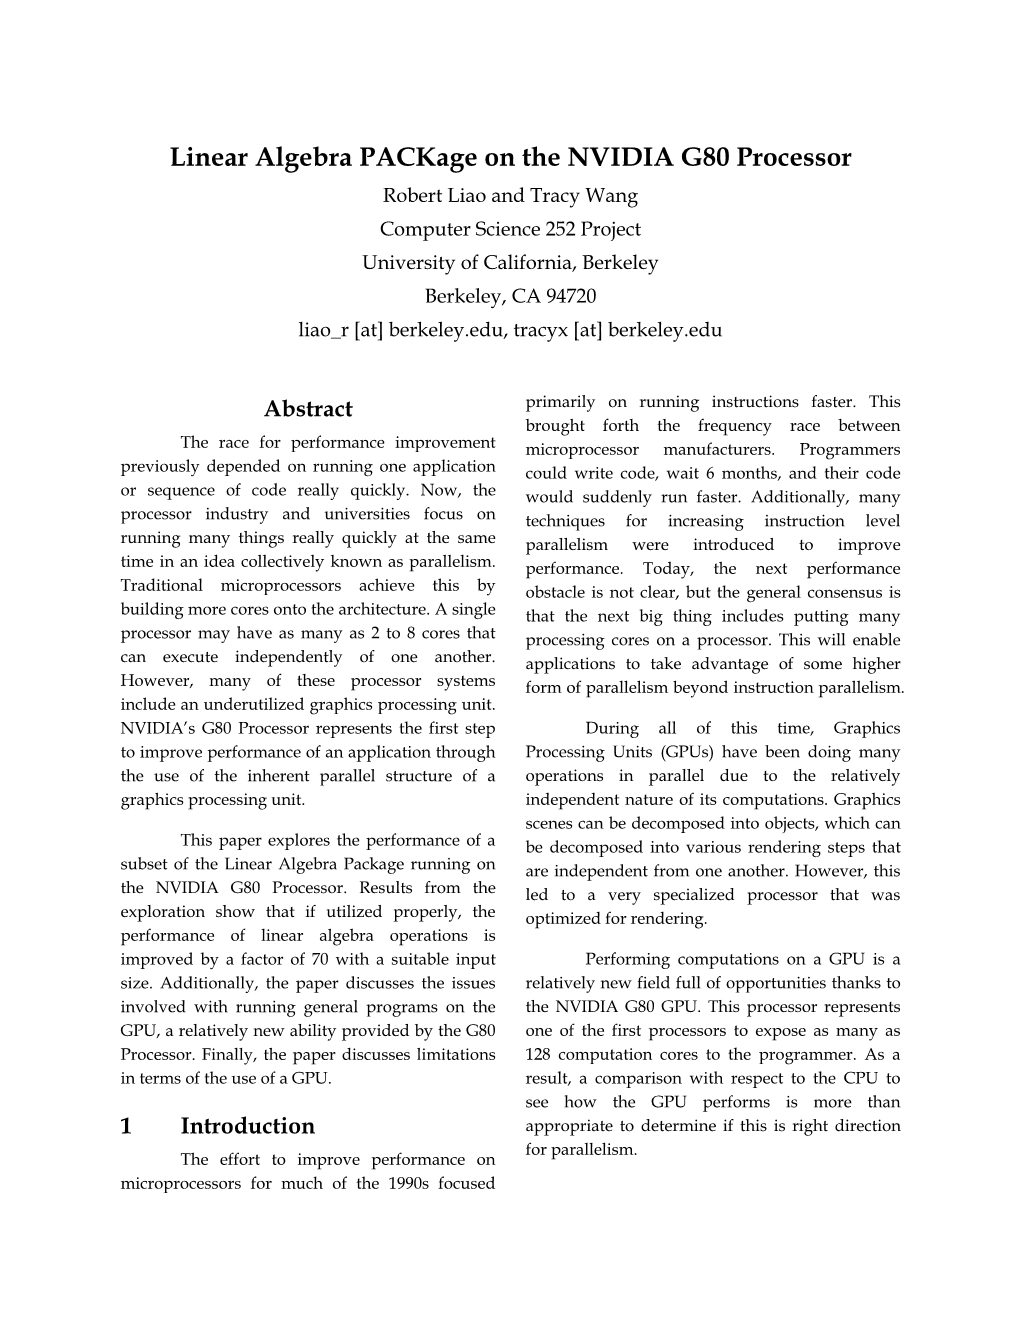 Linear Algebra Package on the NVIDIA G80 Processor